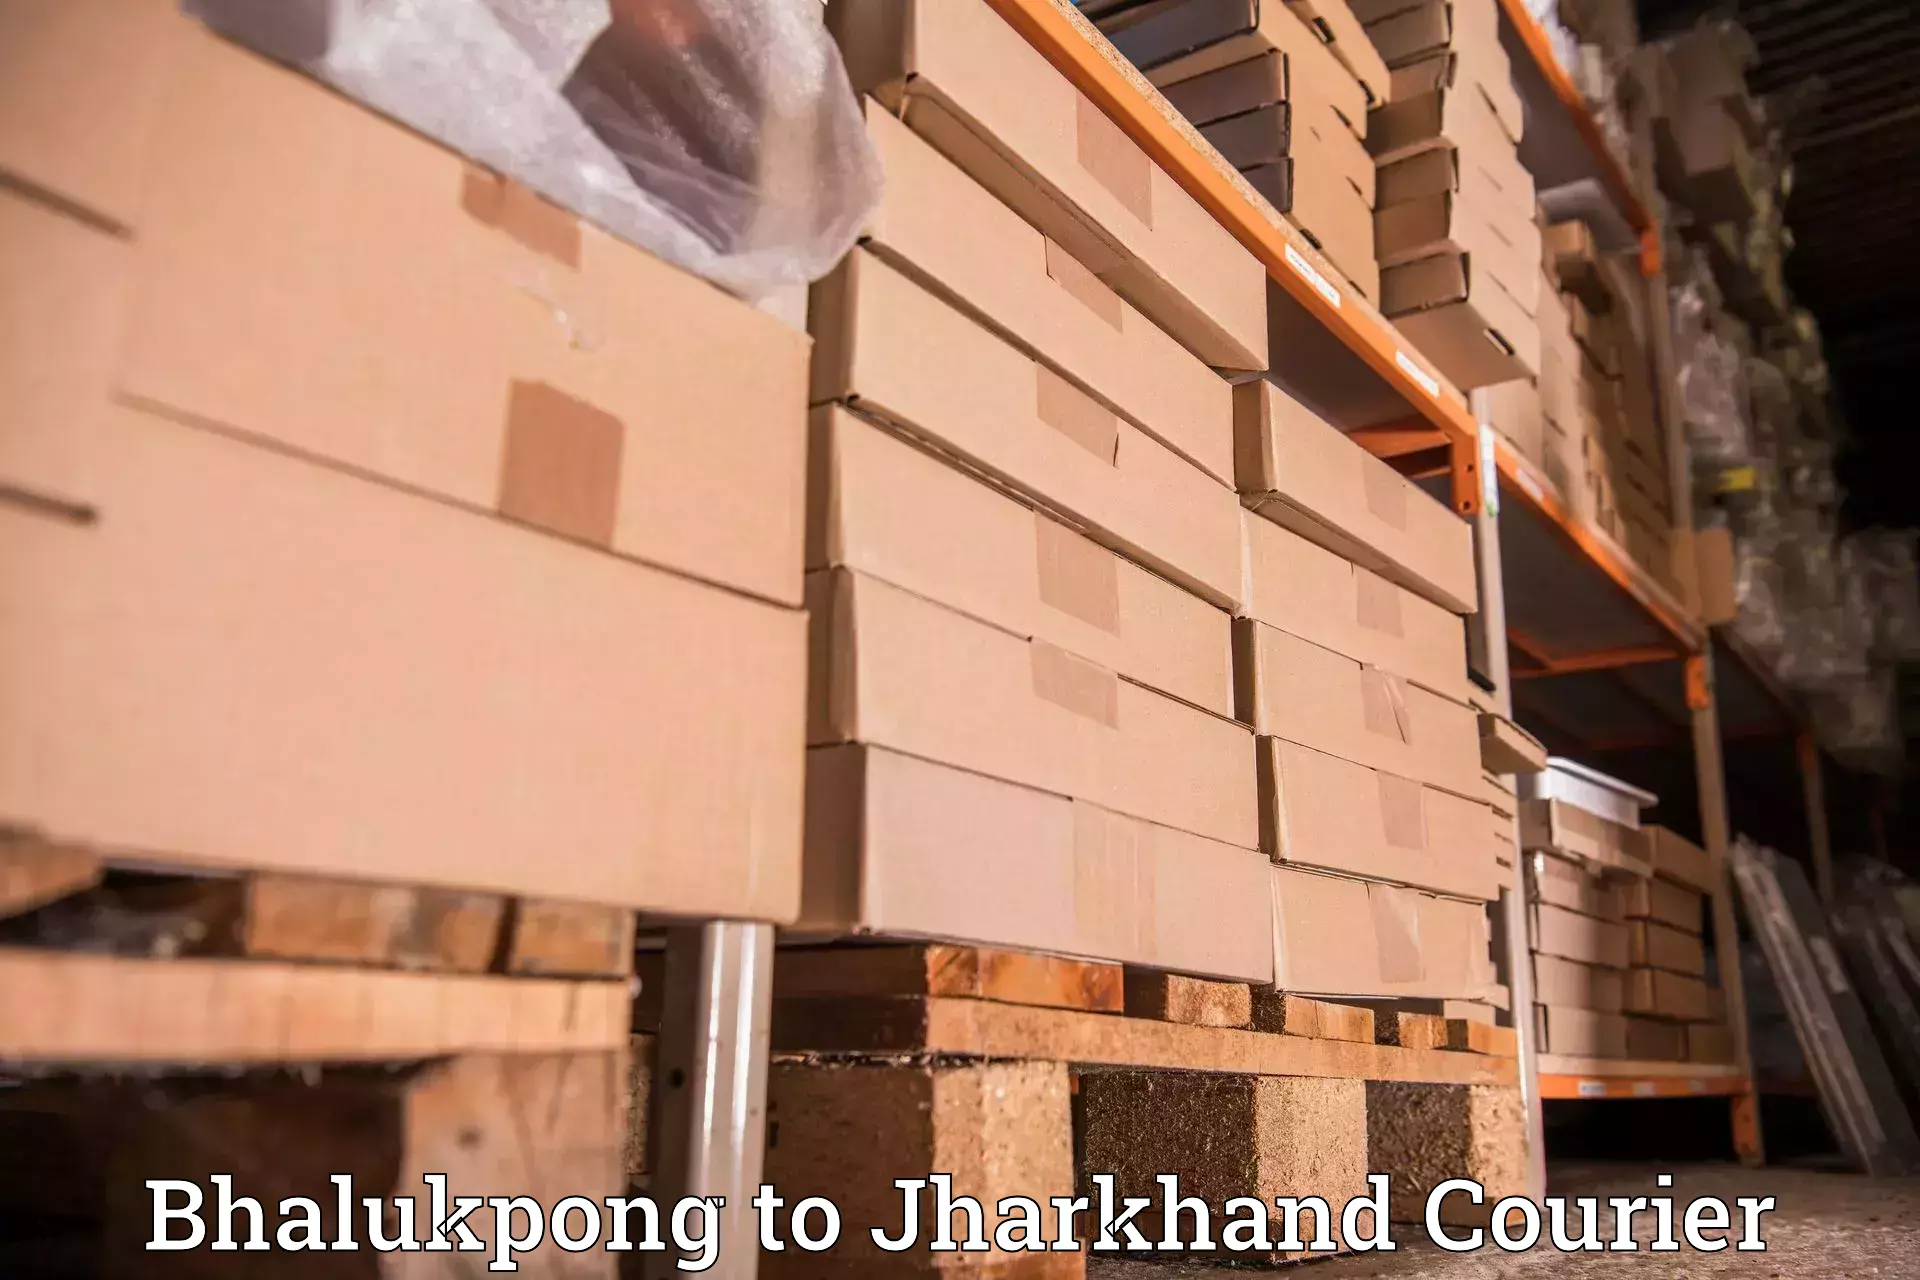 Courier service partnerships Bhalukpong to Dhanbad